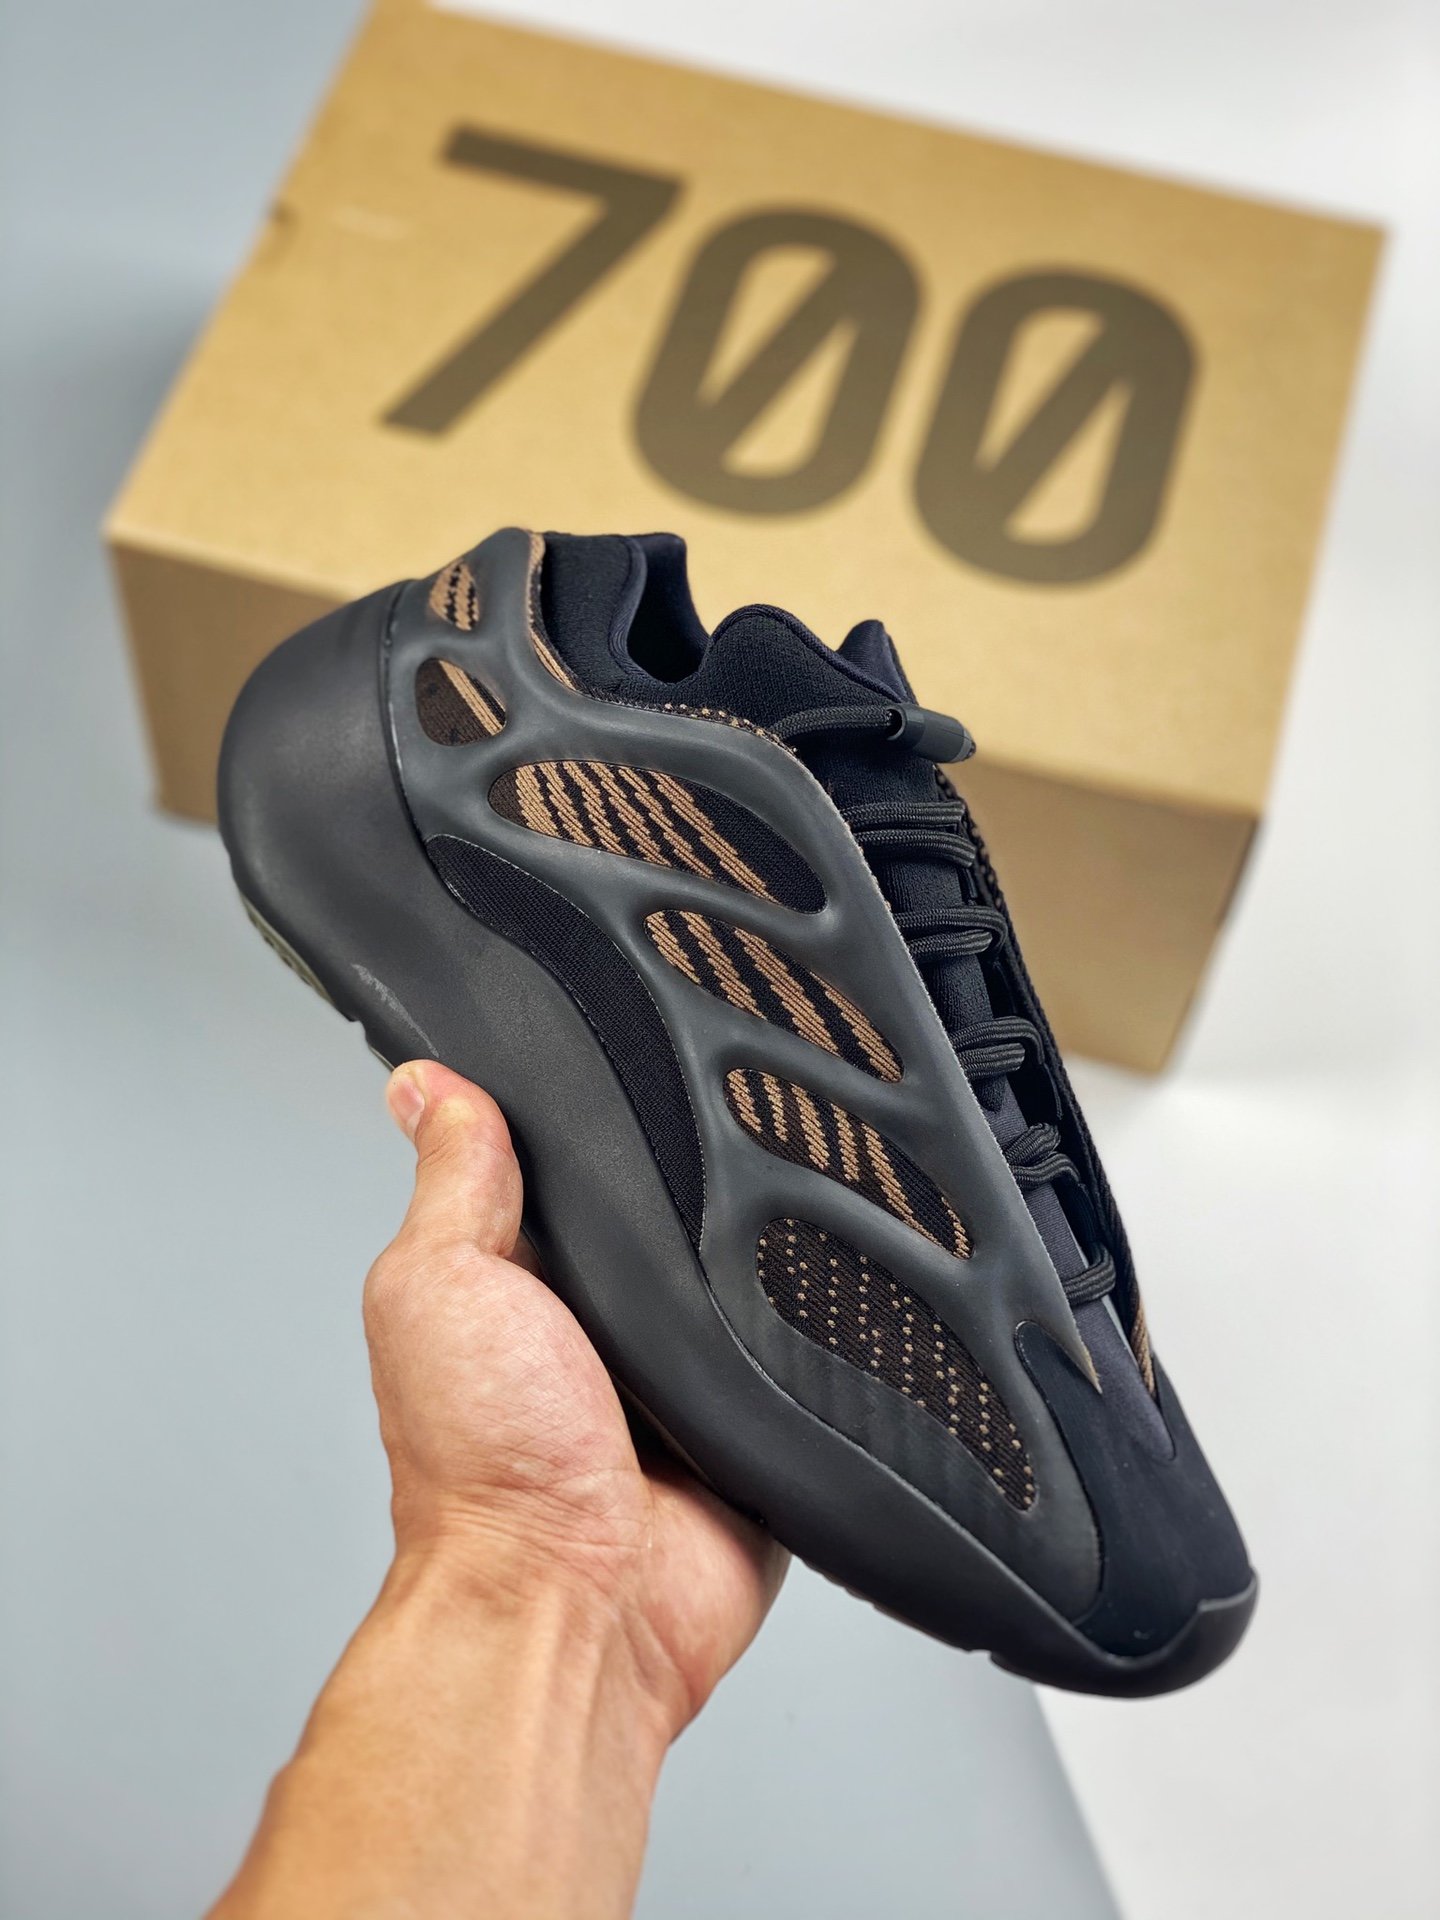 adidas Yeezy 700 V3 “Clay Brown” For Sale – Sneaker Hello